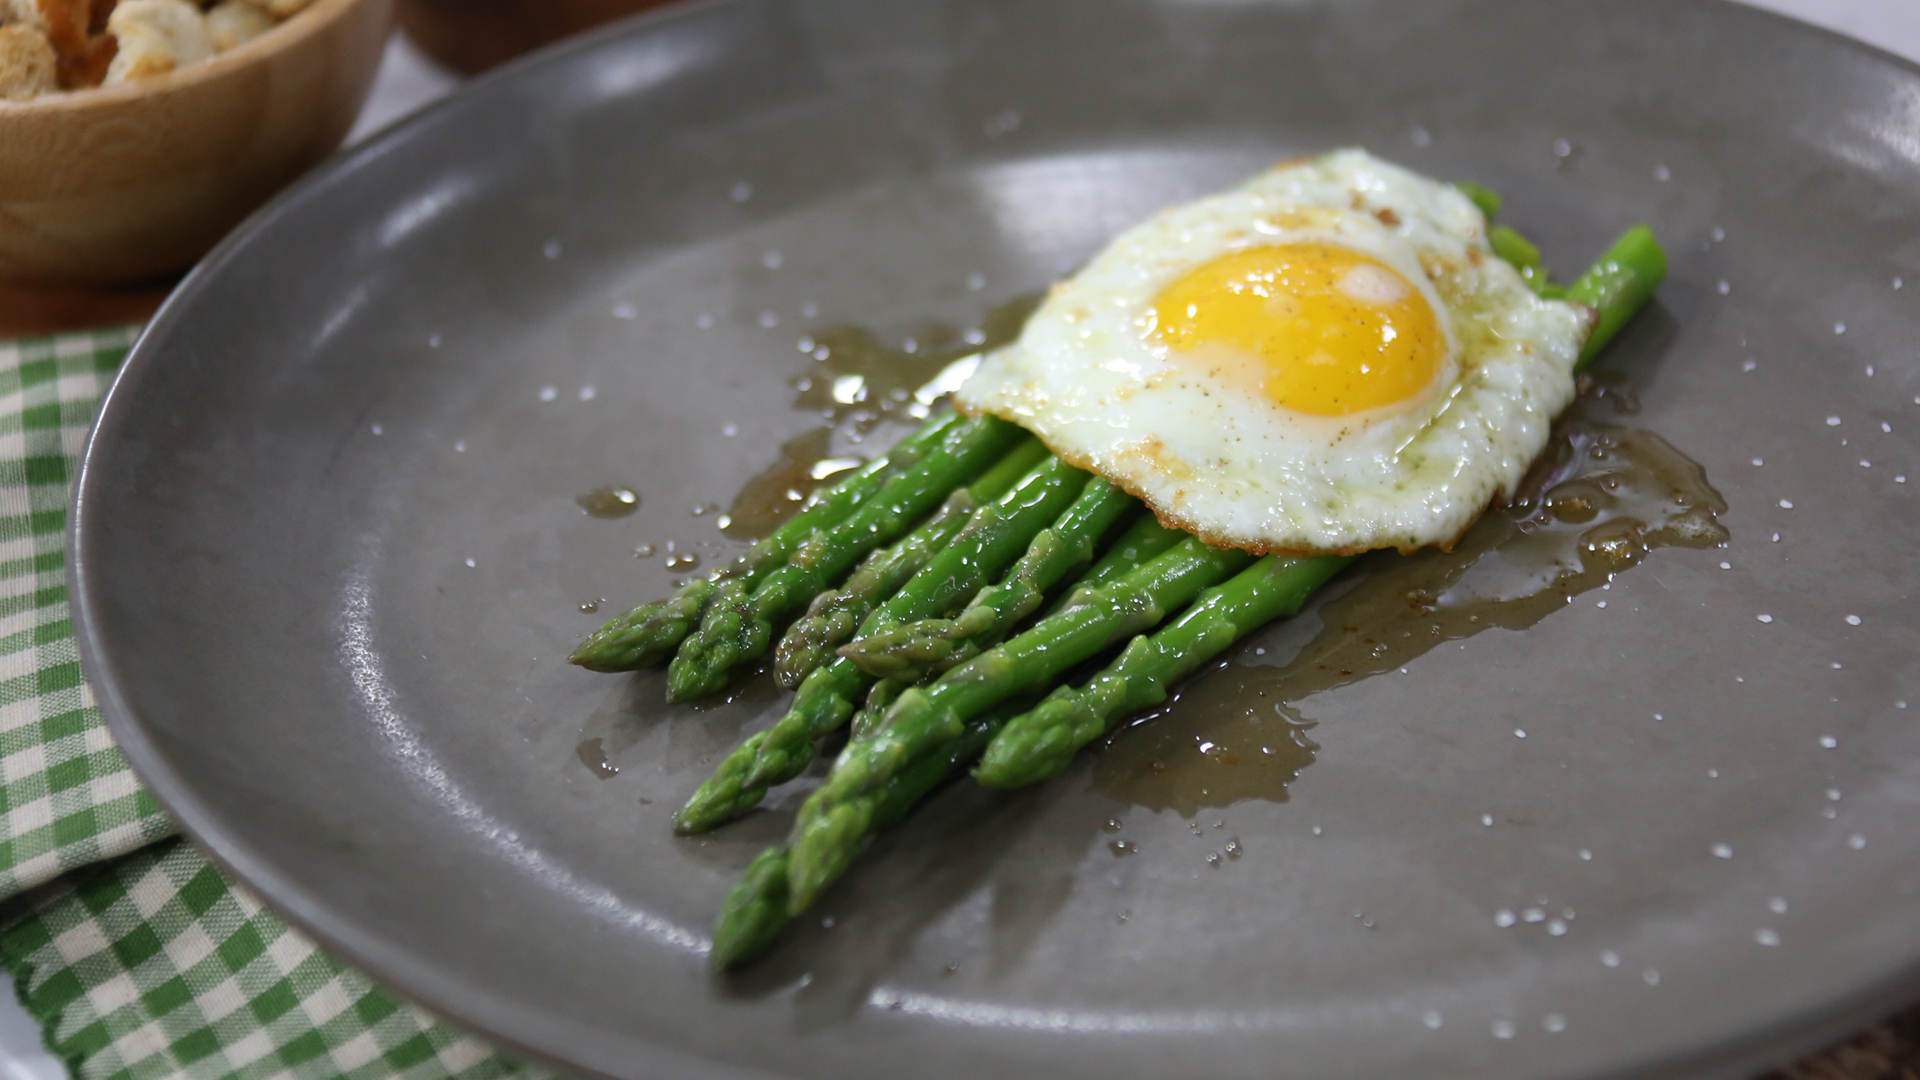 Blanched asparagus with runny egg